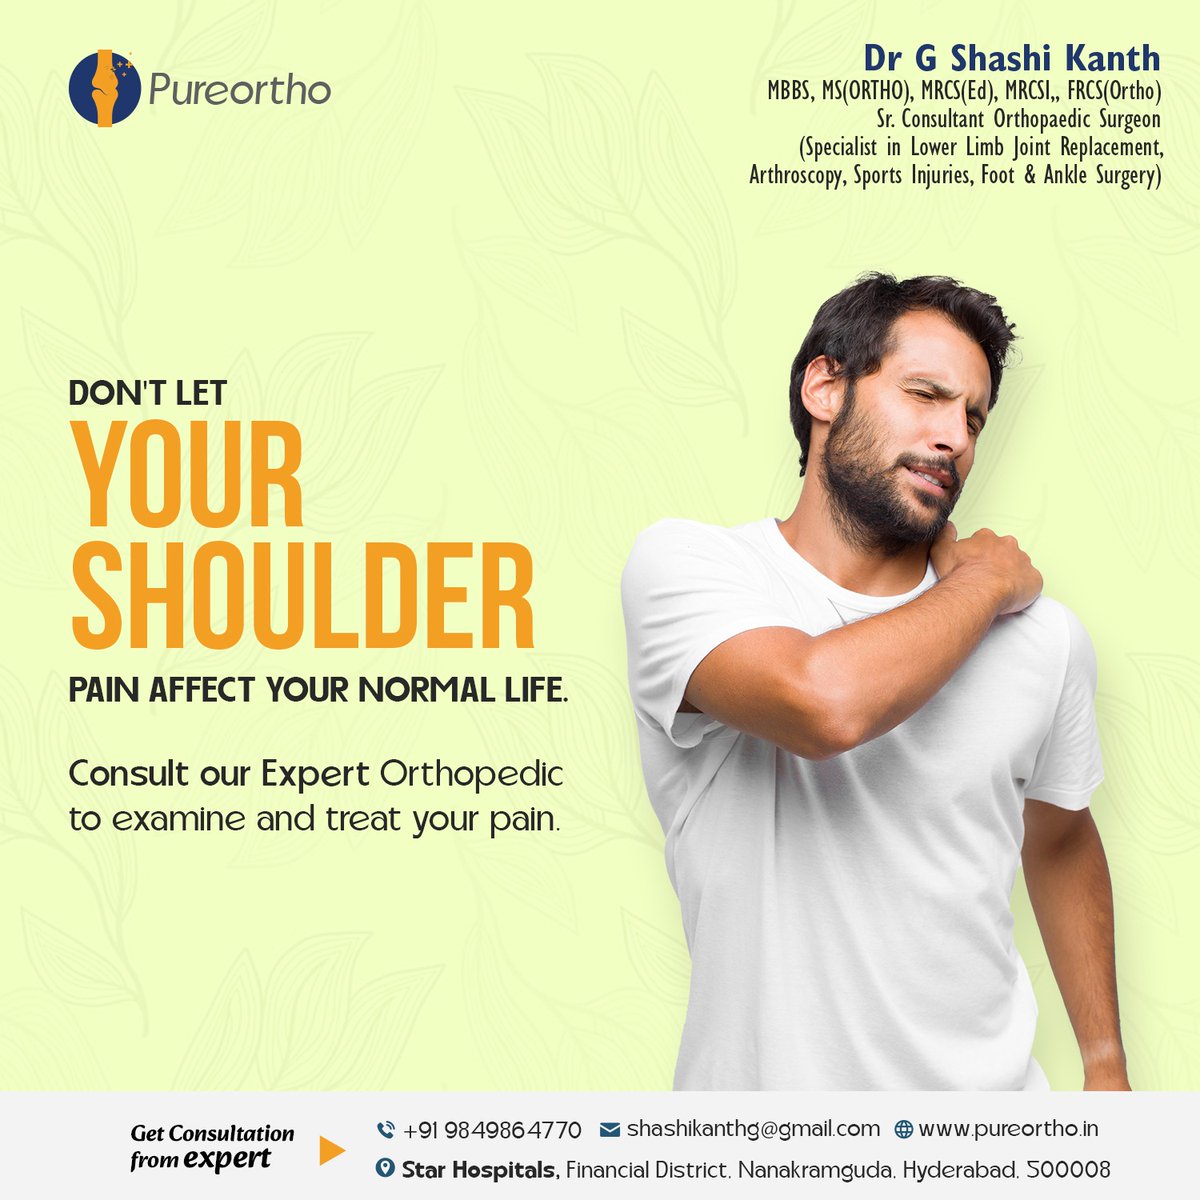 Life's too short to let shoulder pain hold you back! 🚀 Our Expert Orthopedic is here to diagnose and treat, so you can get back to doing what you love pain-free. 💪

#pureortho #pureorthocentre #drgshashikanth #ShoulderRelief #NoMoreShoulderPain
#ShoulderCare #ShoulderFreedom